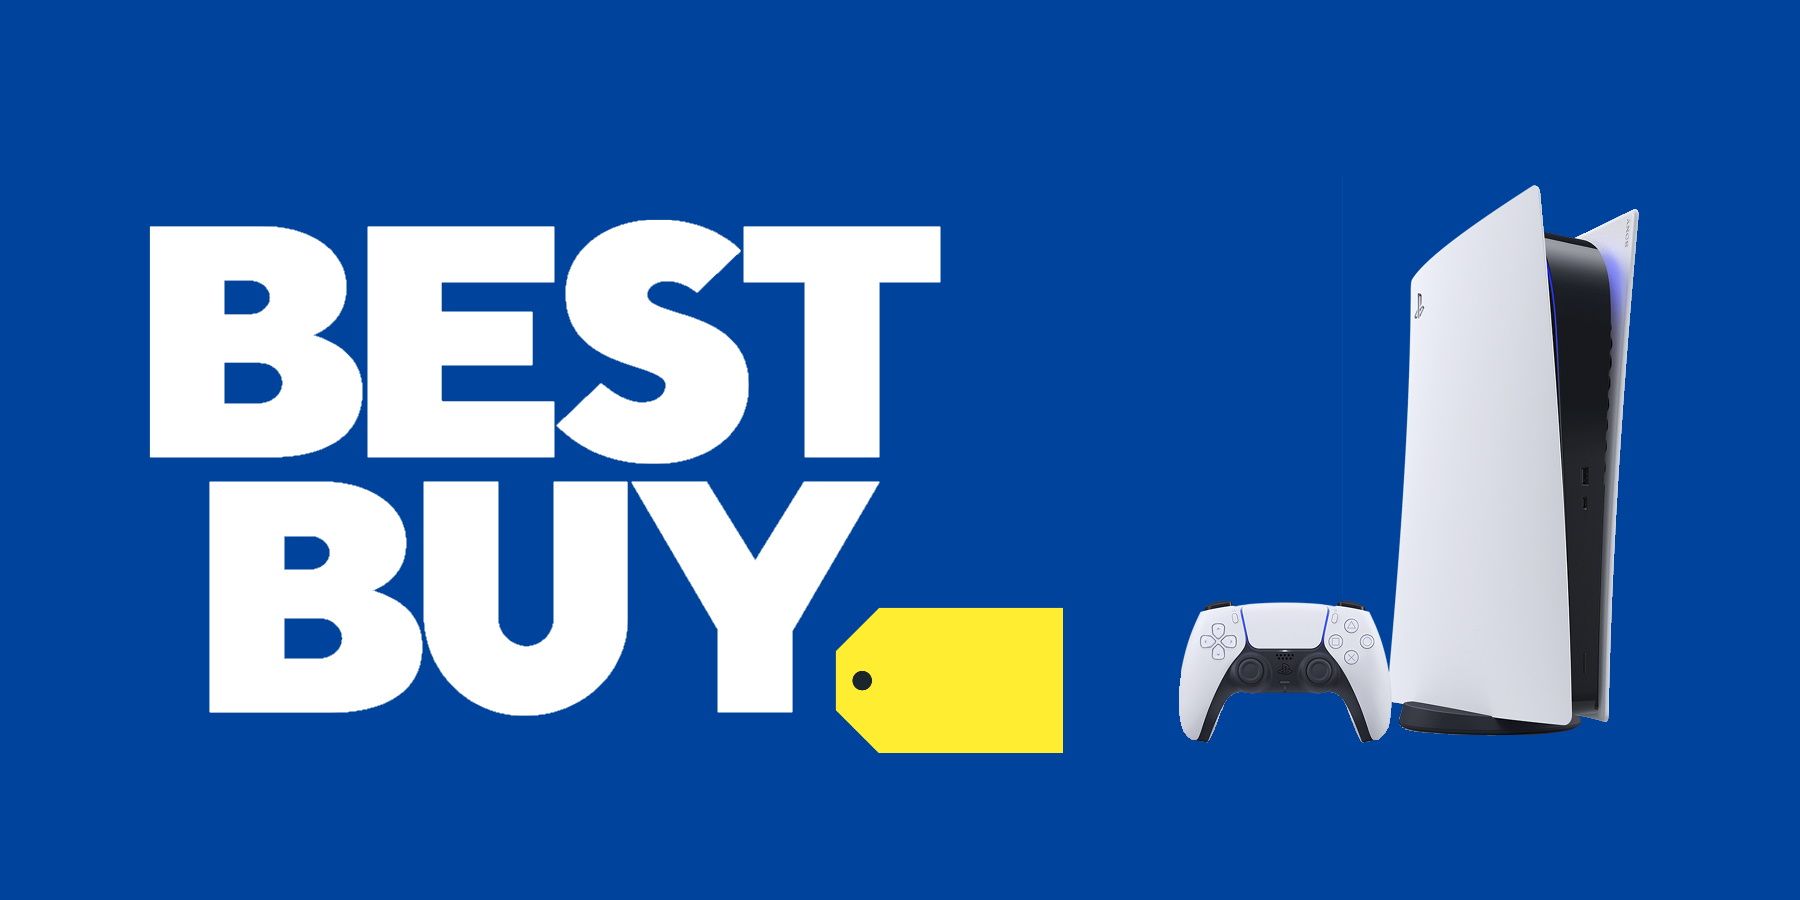 The Invincible PlayStation 5 - Best Buy